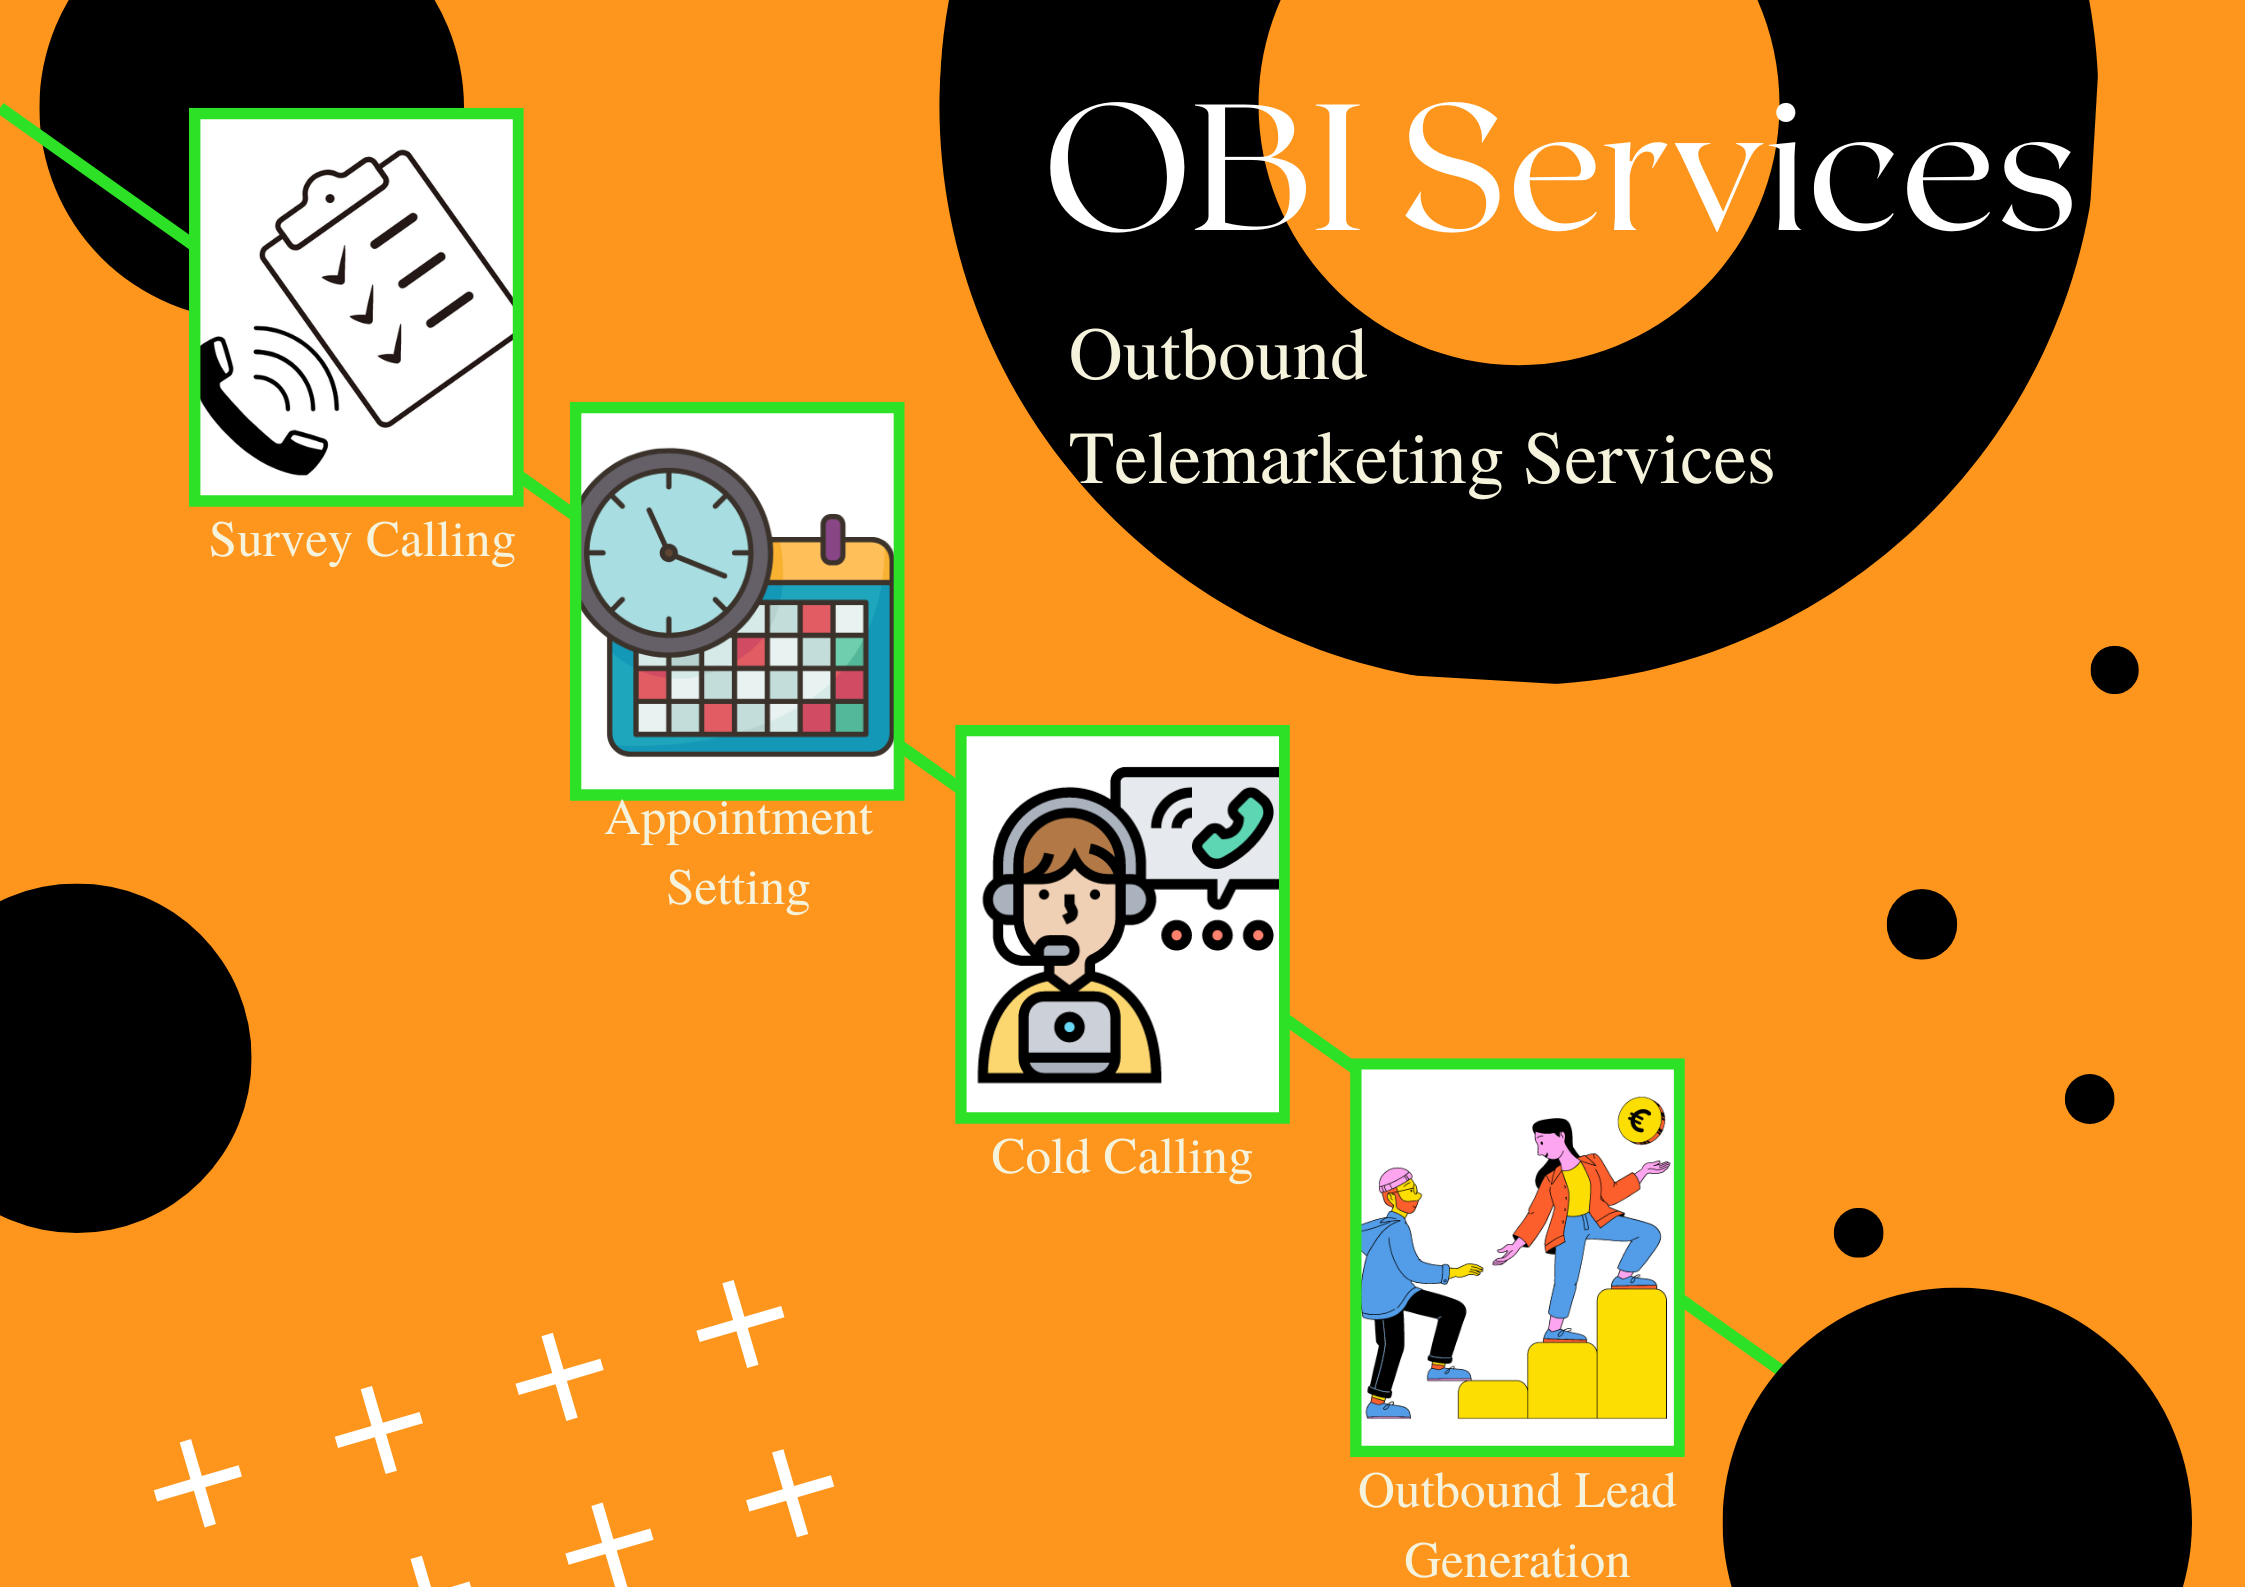 Obi services is your outbound calling service partner